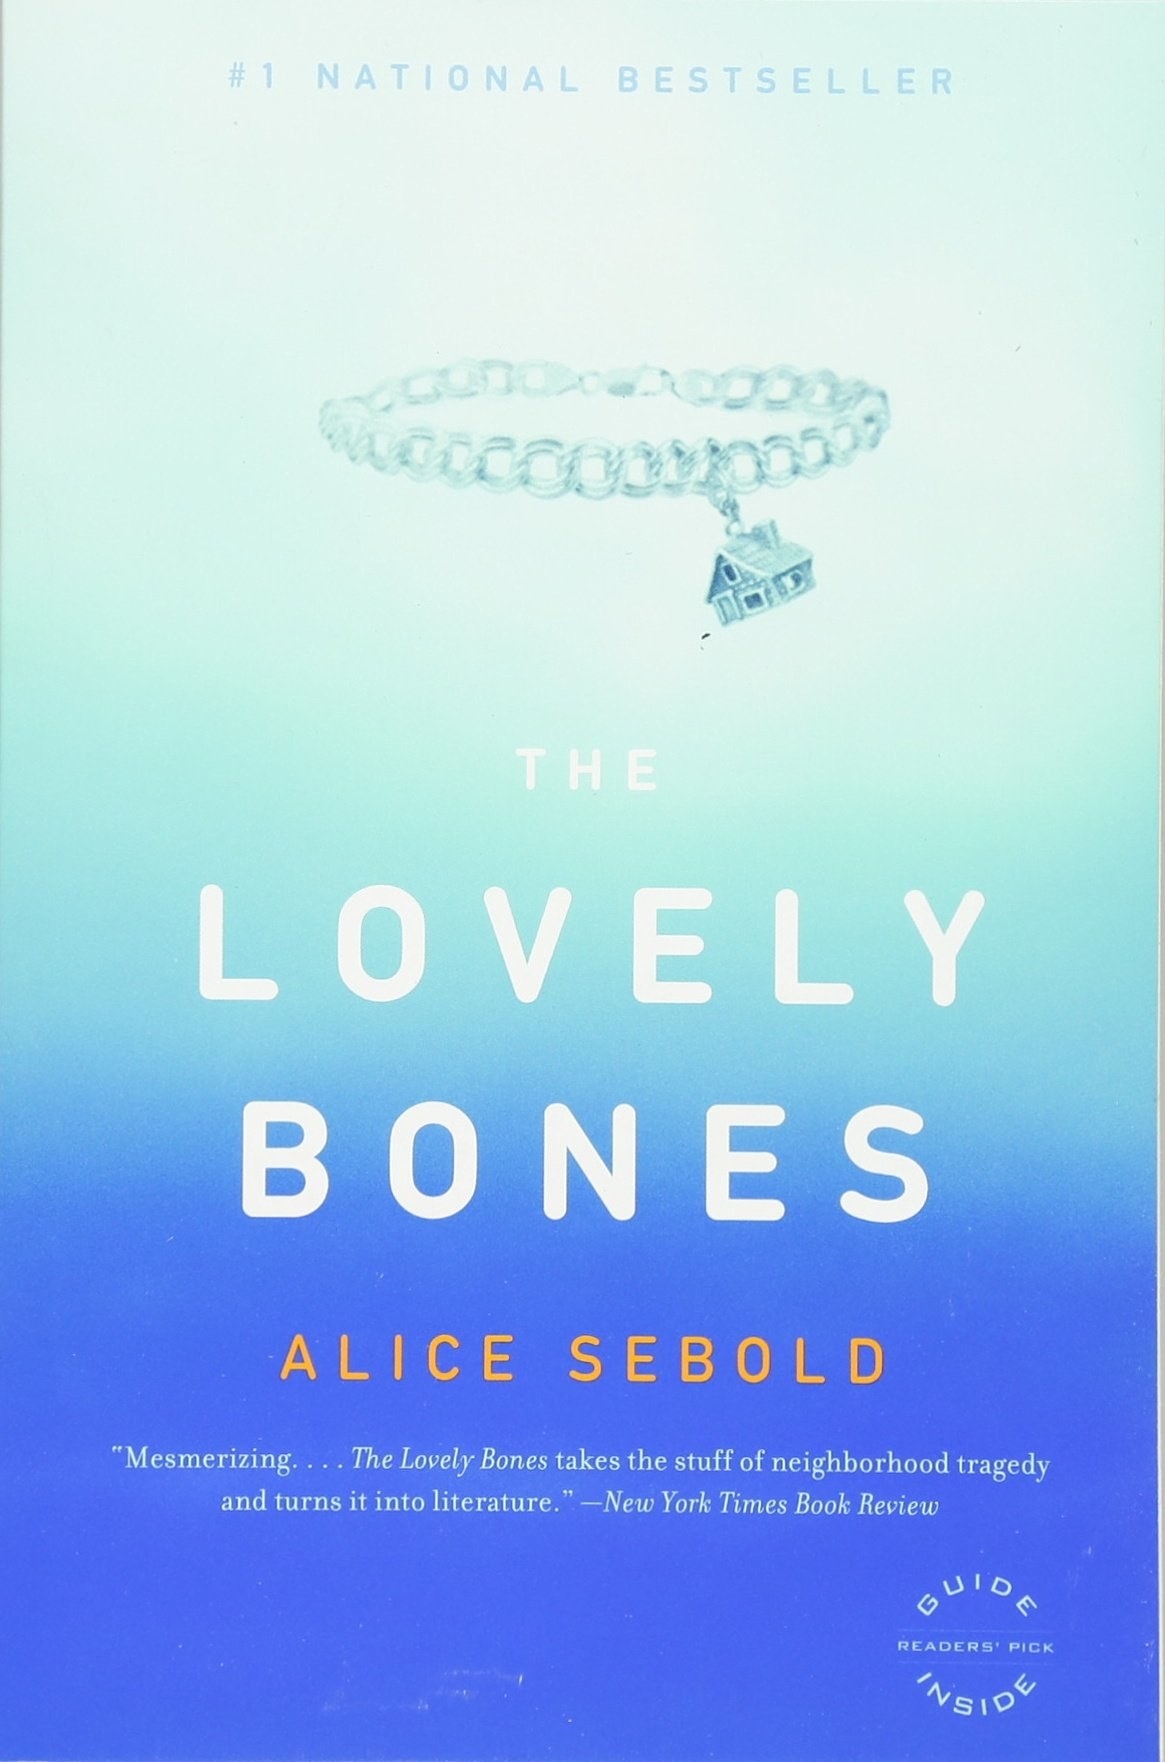 &quot;The Lovely Bones&quot; by Alice Sebold